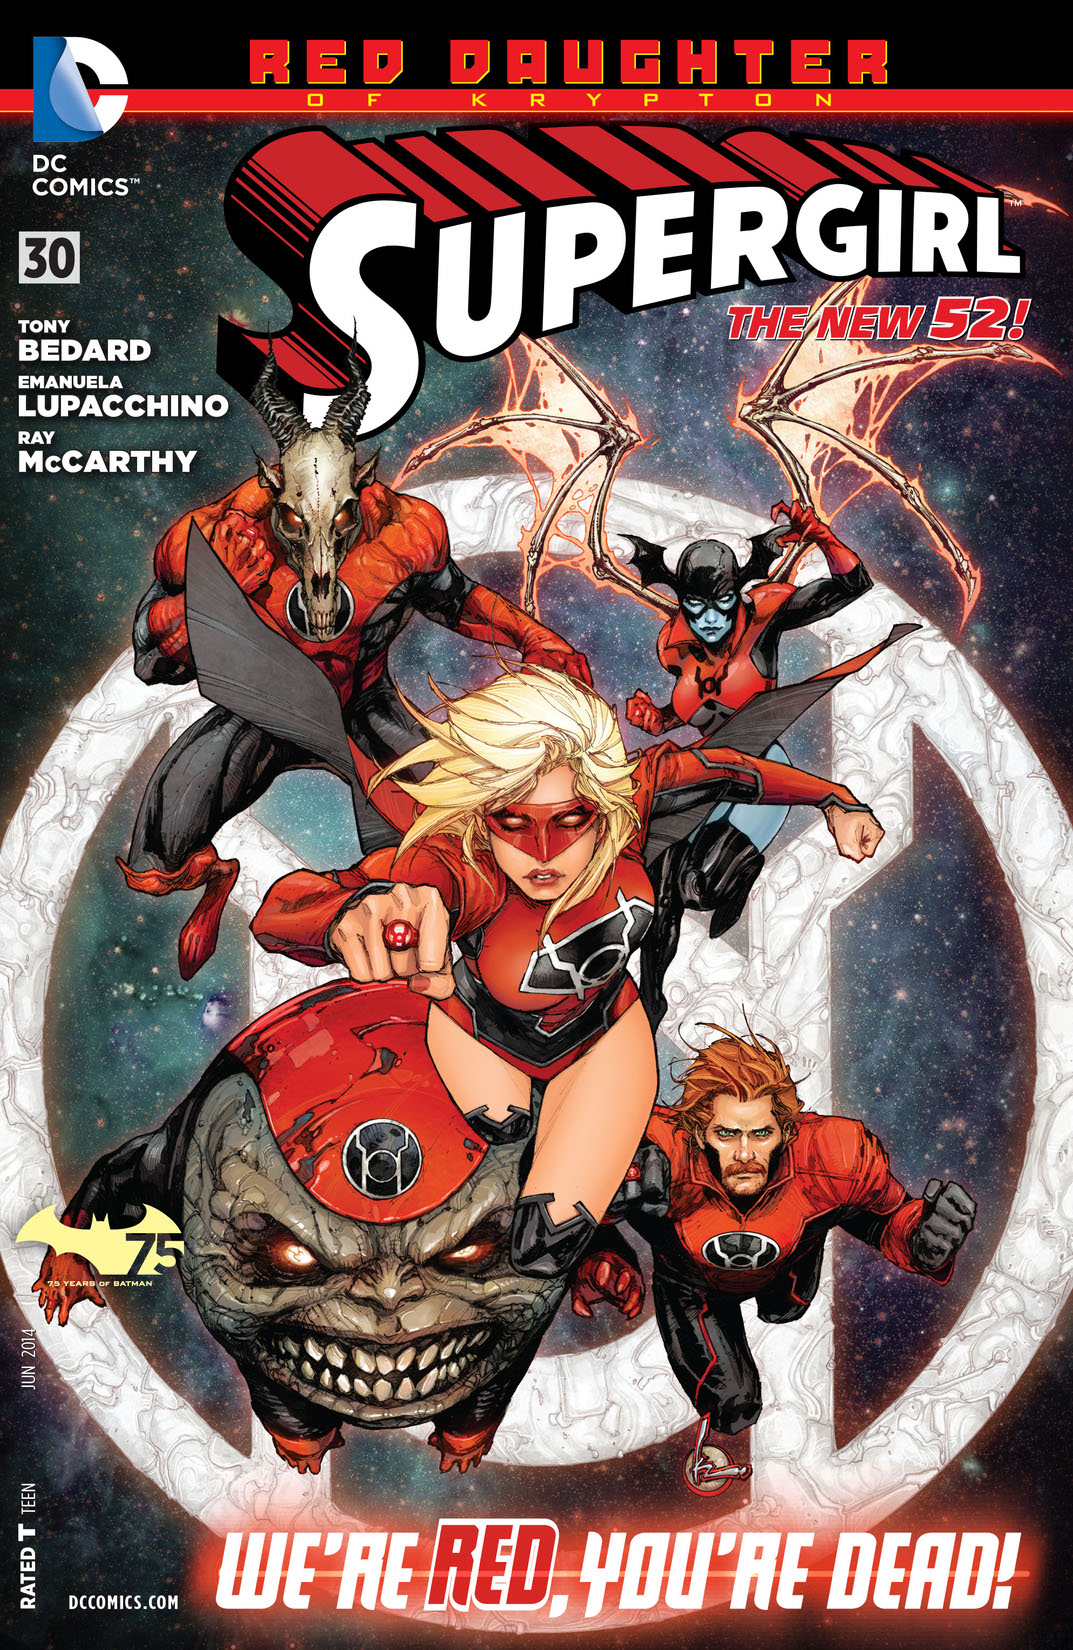 Supergirl (2011-) #30 preview images